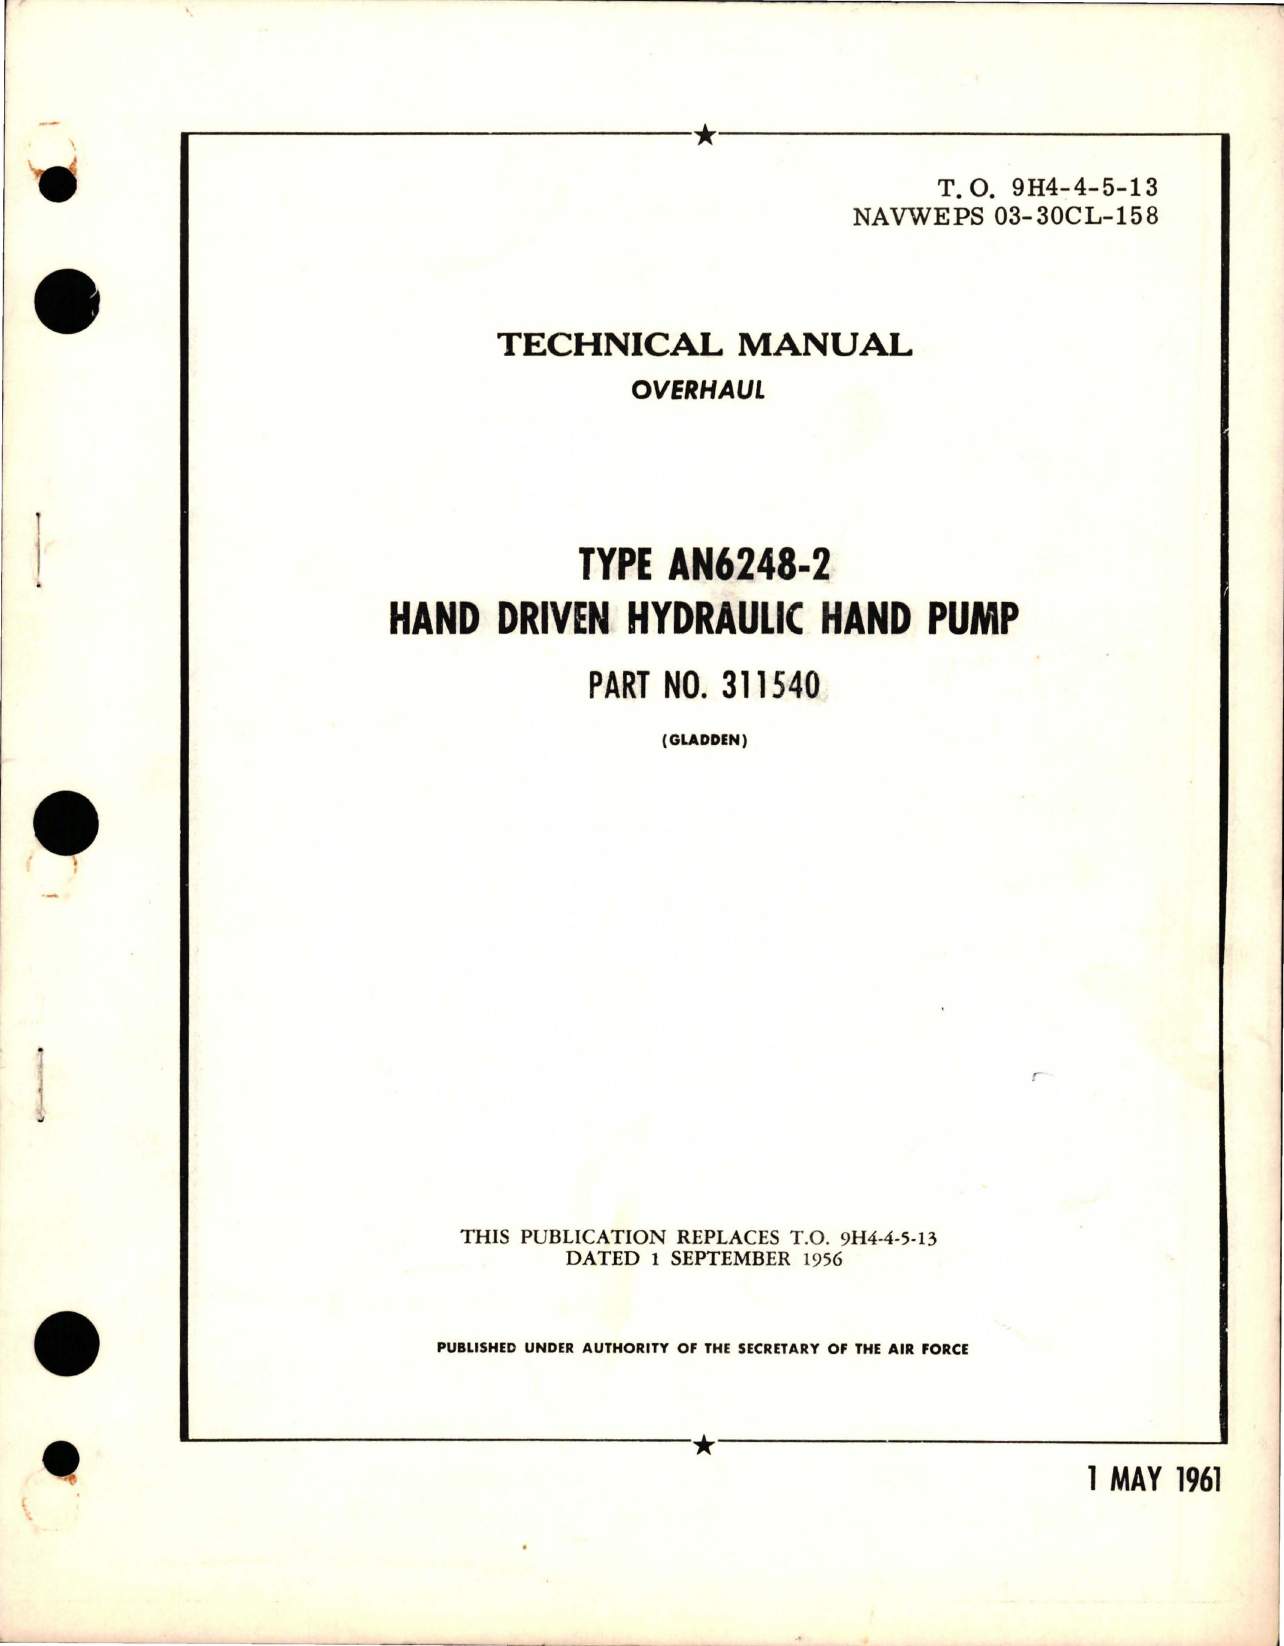 Sample page 1 from AirCorps Library document: Overhaul Manual for Hand Driven Hydraulic Hand Pump - Type AN6248-2 - Part 311540